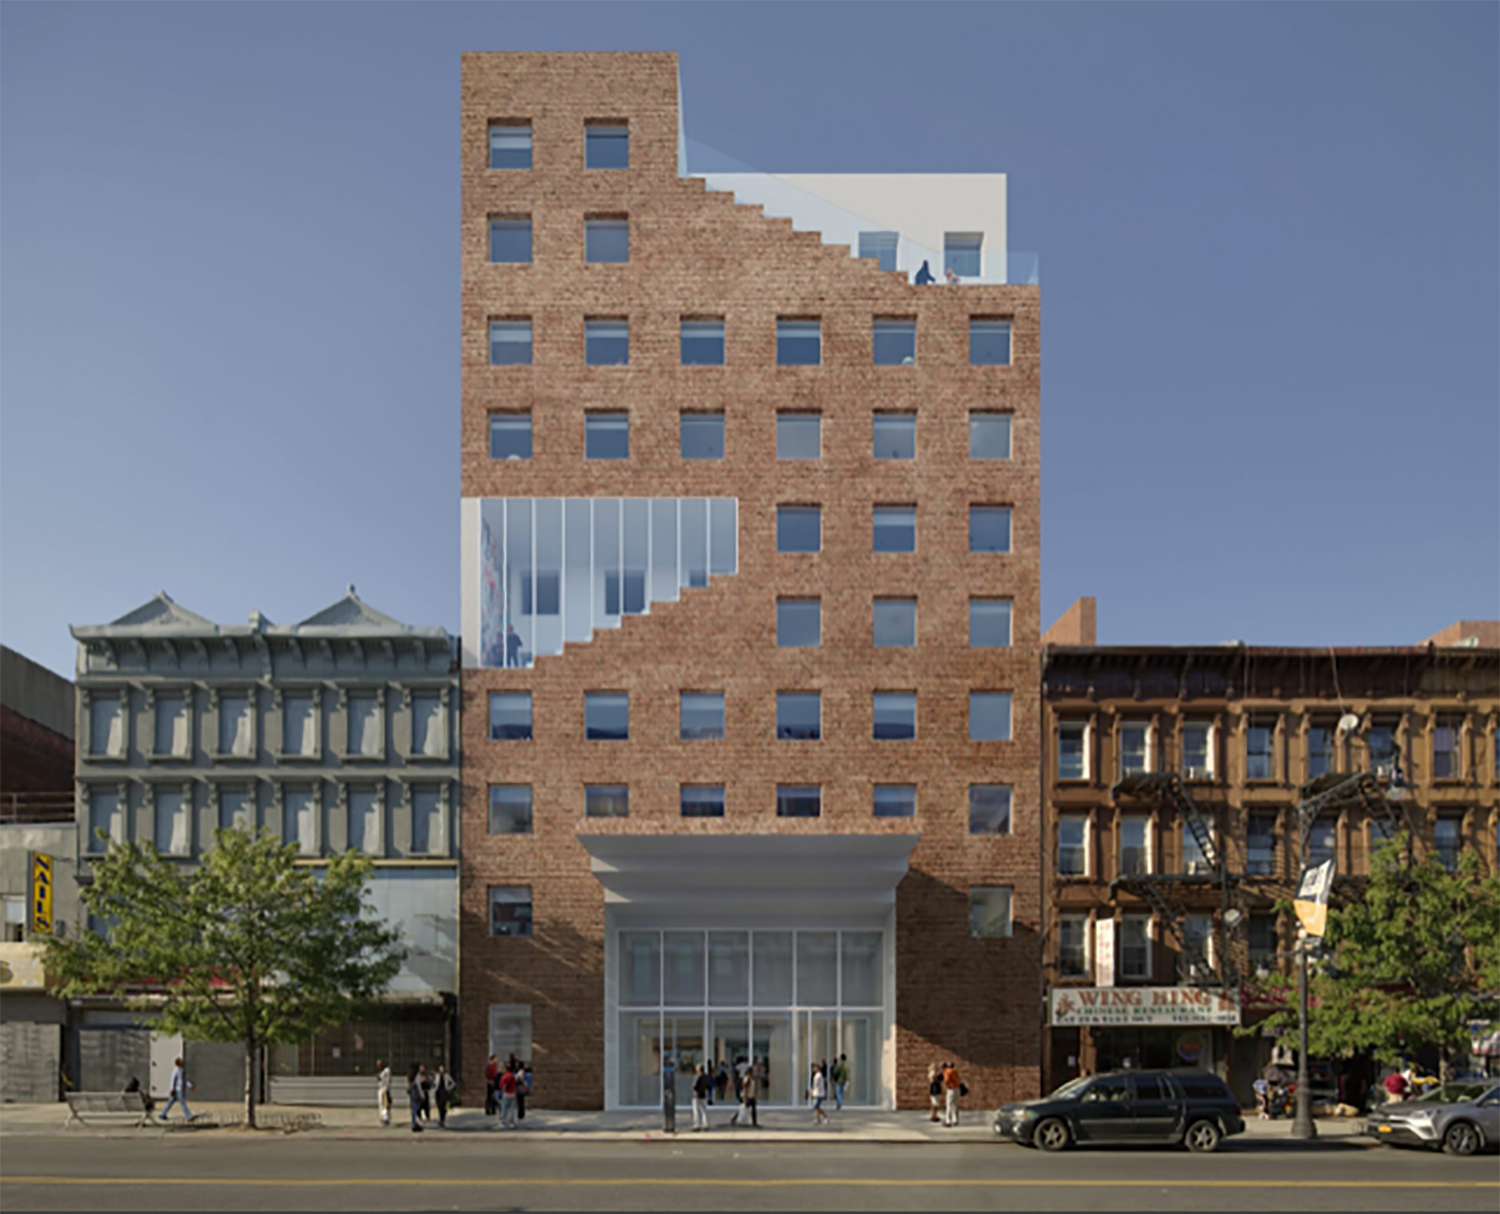 Rendering of 1215 Fulton Street. Courtesy of Tower Holdings Group, The Collective and Artefactorylab